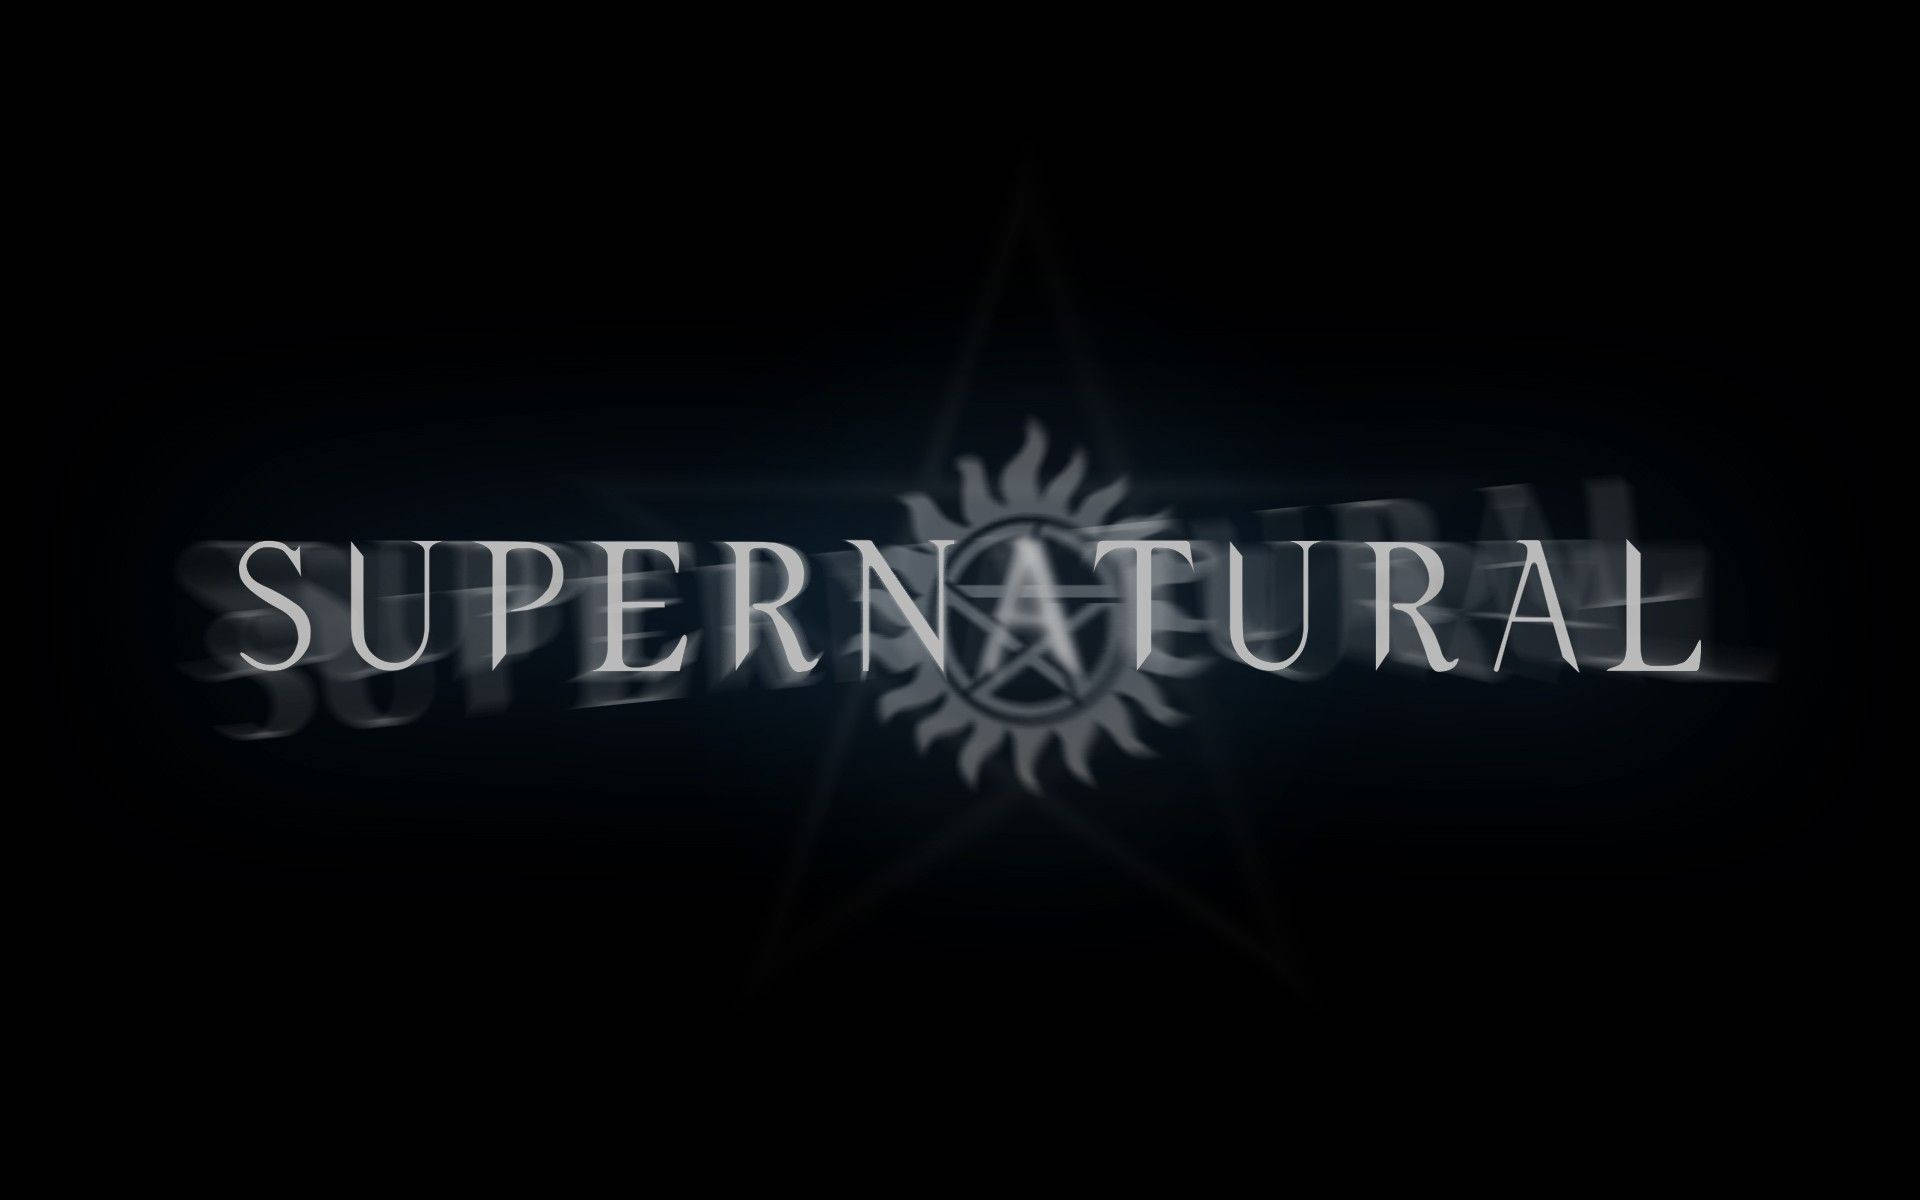 The Power of the Supernatural Wallpaper